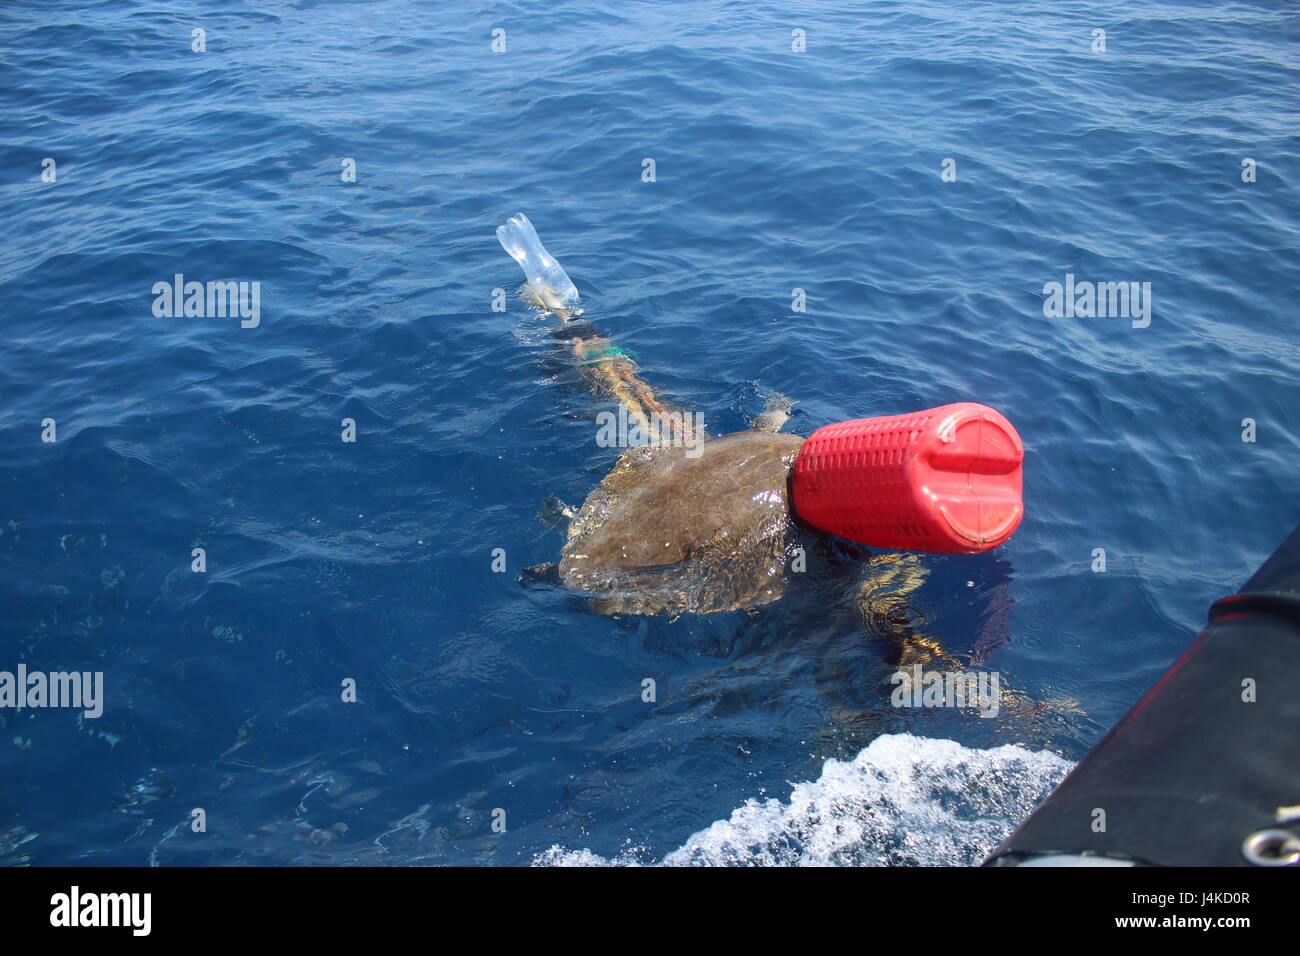 A sea tangle swims entangled in a mass of fishing gear and garbage before the crew of Coast Guard Cutter Valiant free it while on a routine patrol in the Eastern Pacific Ocean, April 23, 2017. While underway, crewmembers stand 24/7 watch and are always on the lookout for potentially hazardous debris and endangered sea life in addition to watching for suspicious vessels and signs of distress. (U.S. Coast Guard courtesy photo.) Stock Photo